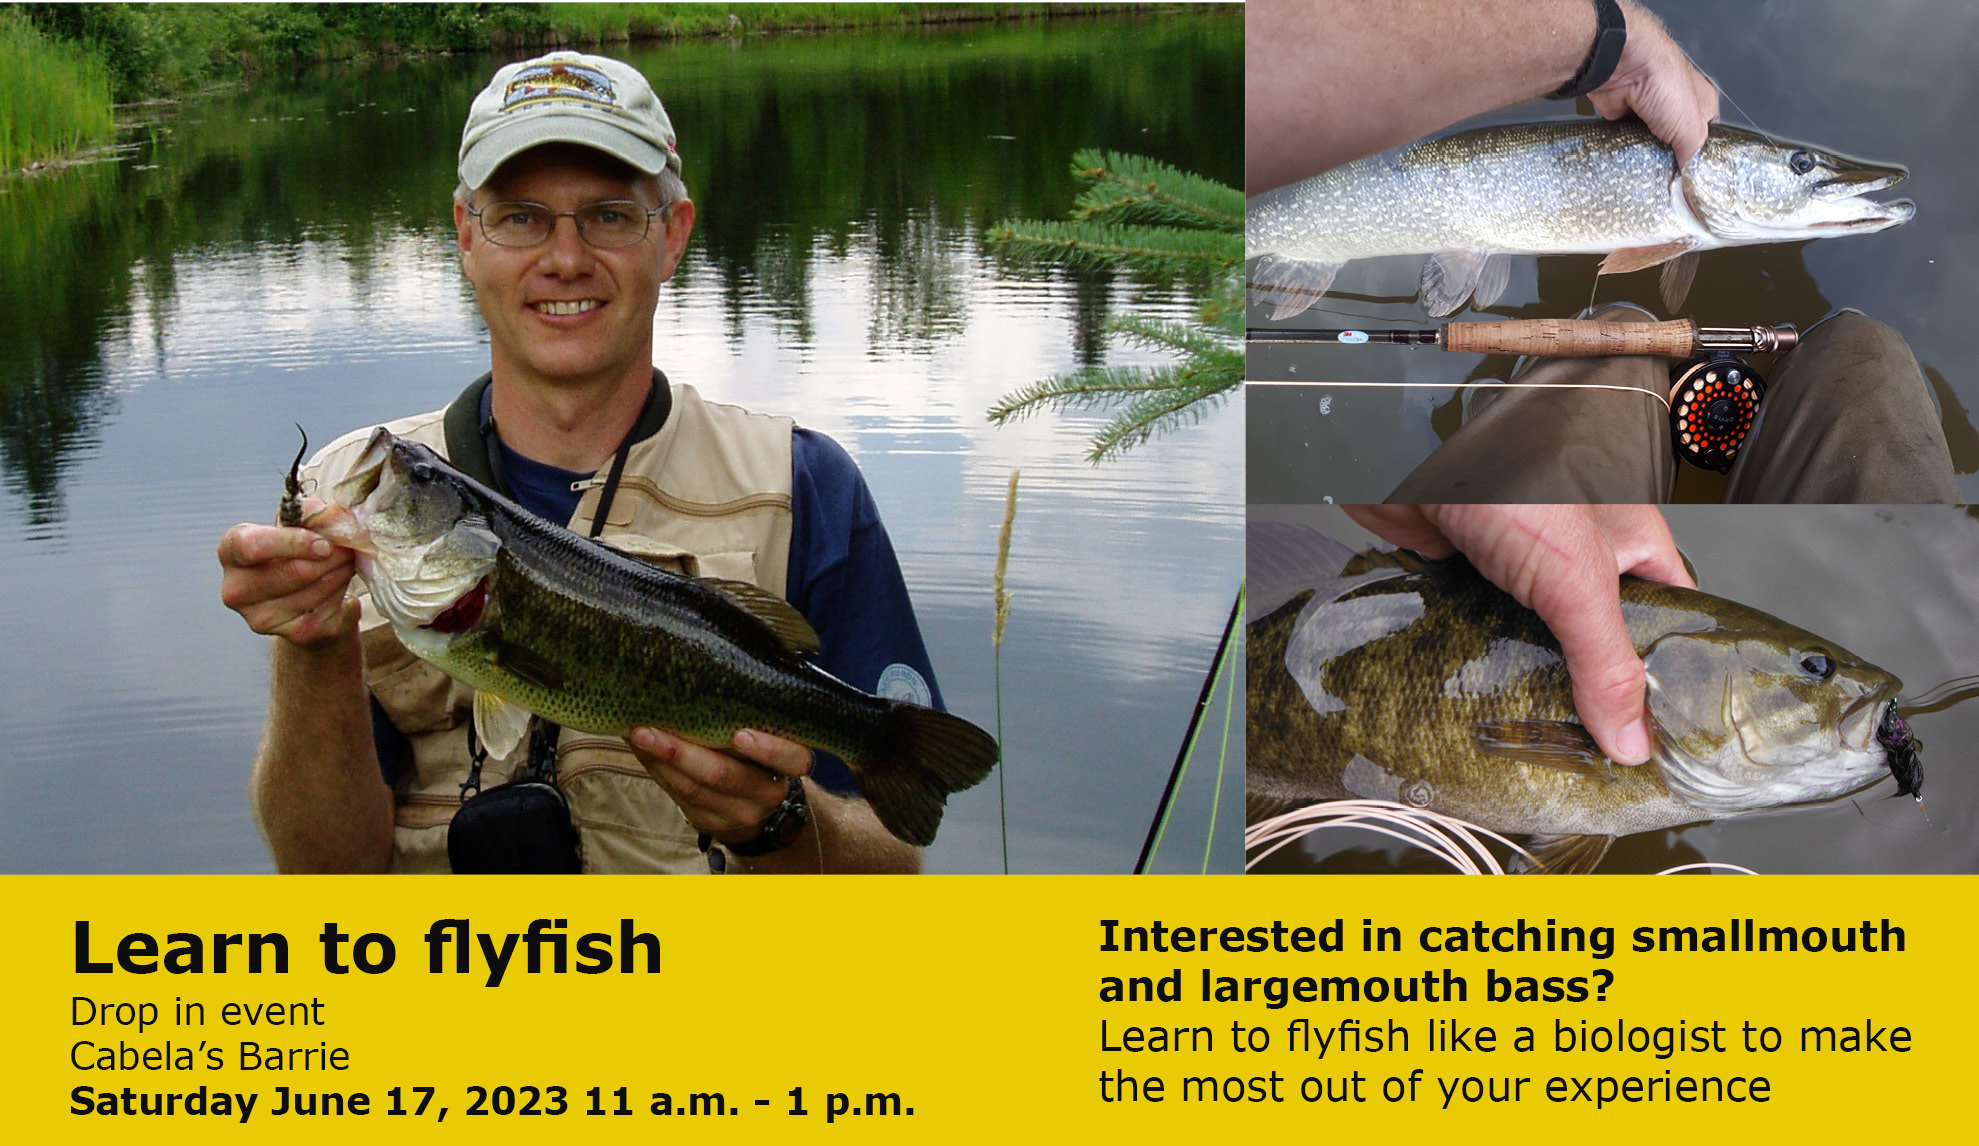 Learn to flyfish like a biologist - The Nottawasaga Valley Conservation  Authority